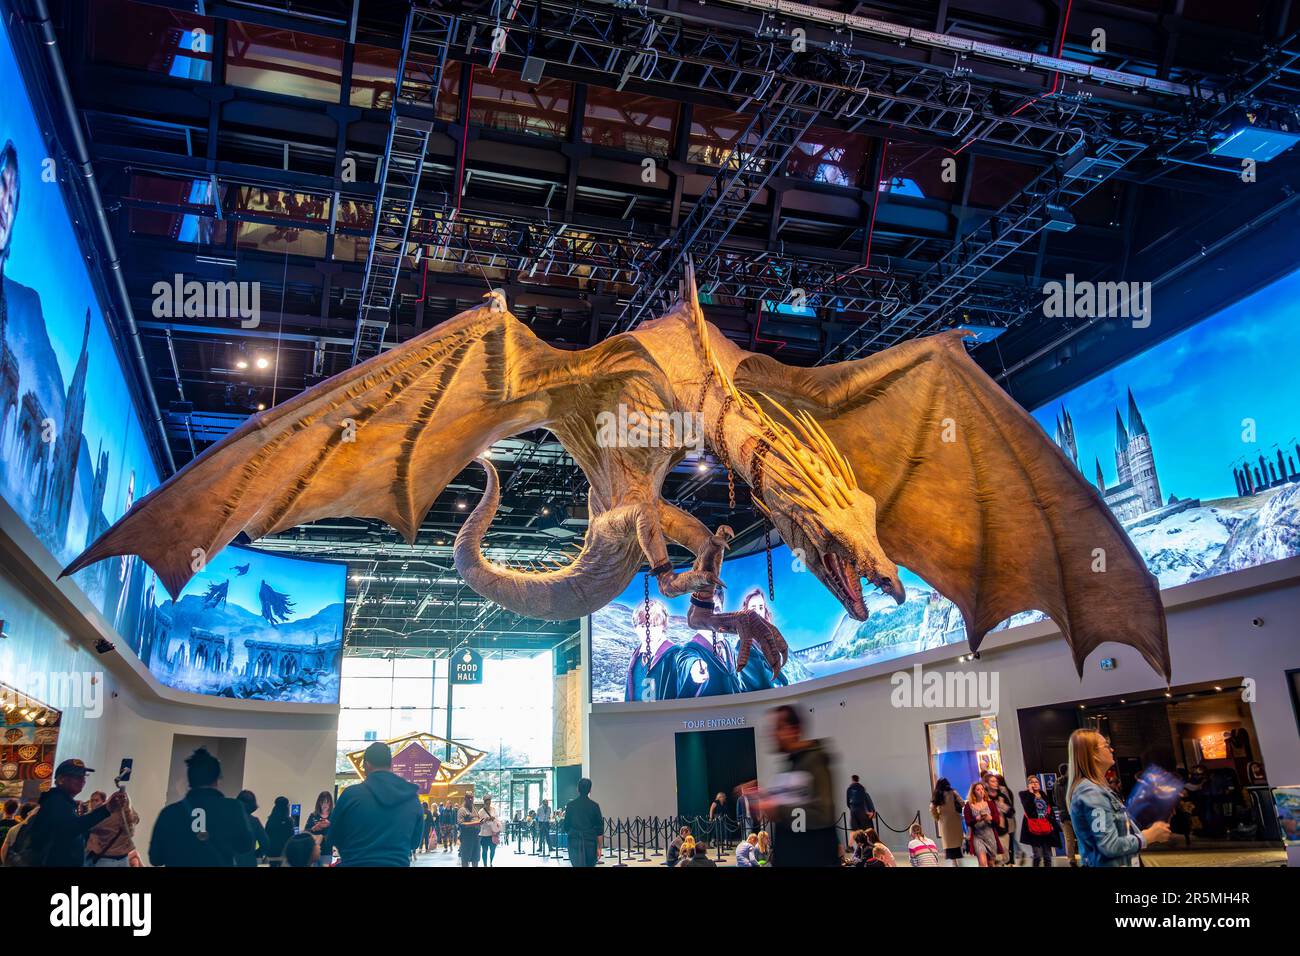 A large model dragon hangs from the ceiling at the entrance to the Harry Potter studio tour in Watford, UK Stock Photo